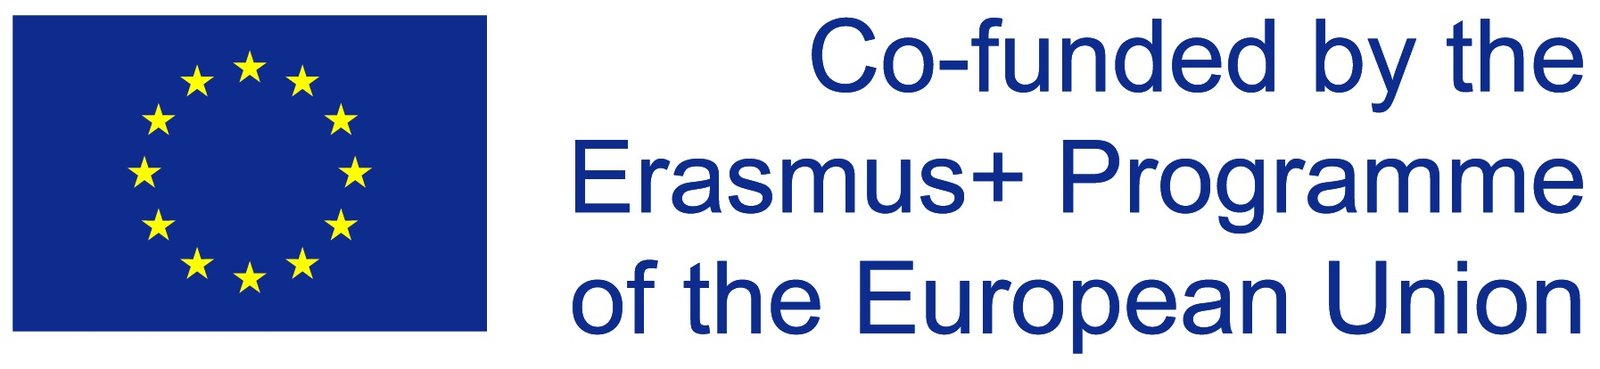 ECOBIAS Project – Co-funded by the Erasmus+ Programme